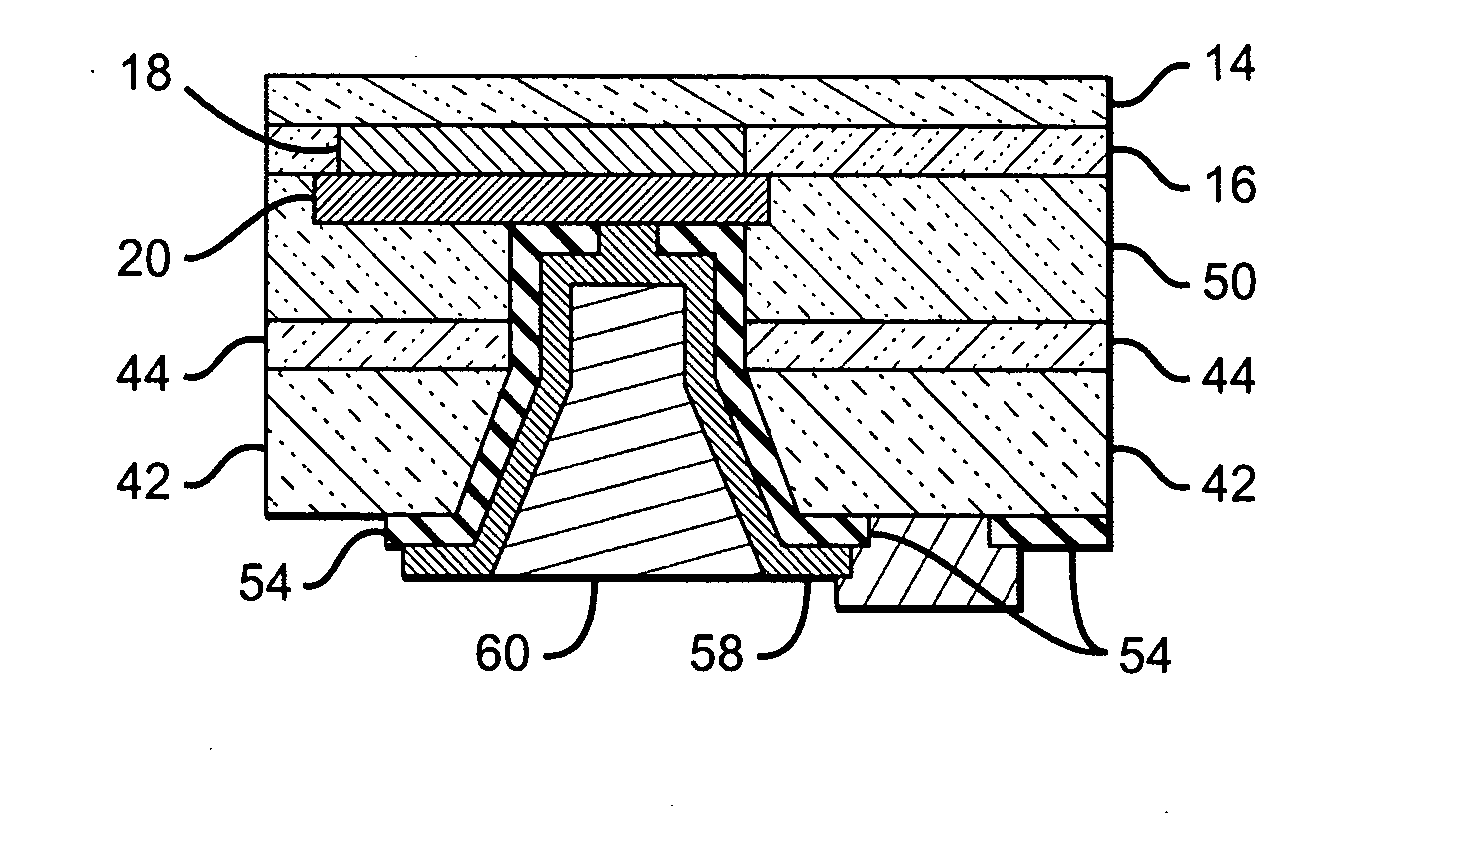 Dielectric wafer level bonding with conductive feed-throughs for electrical connection and thermal management